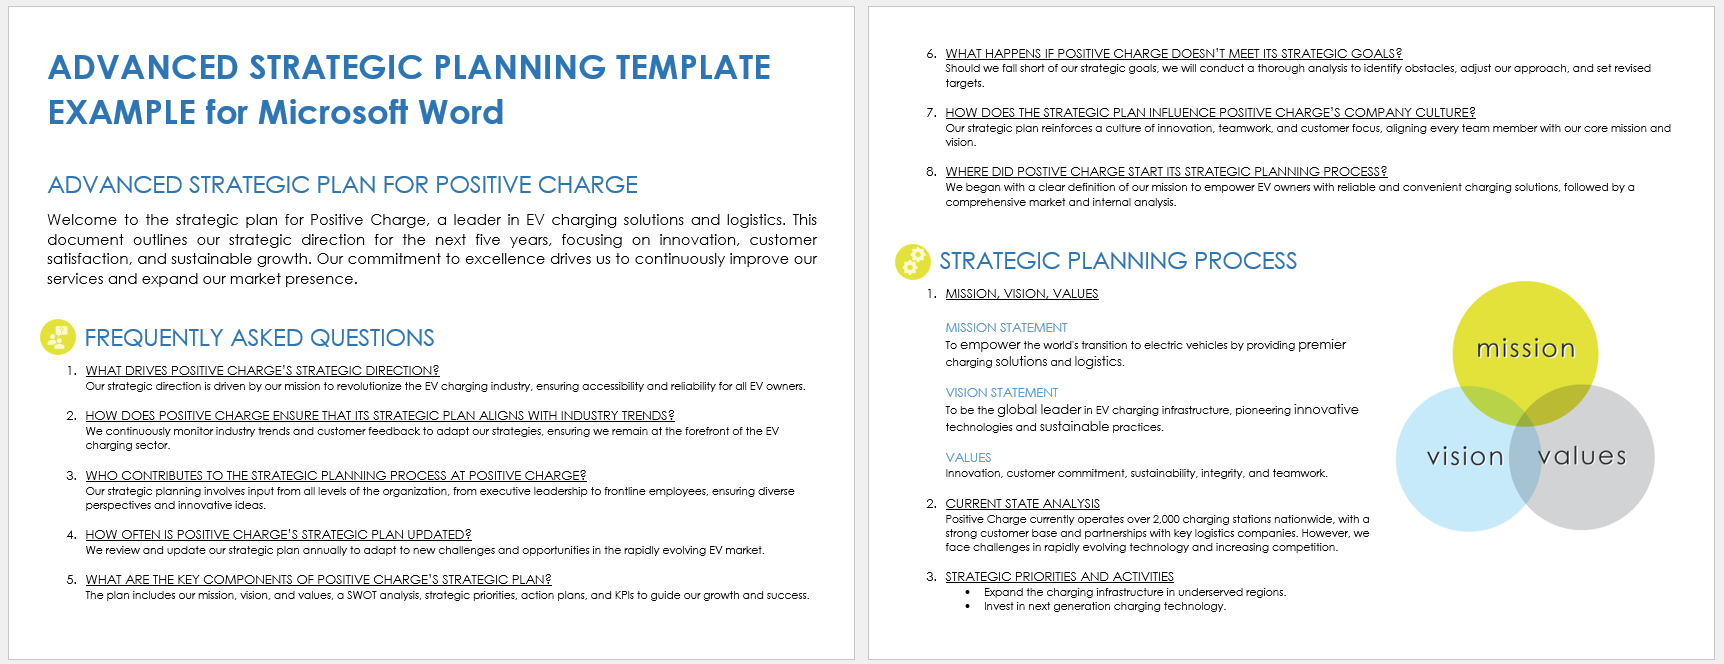 Advanced Strategic Planning Template for Microsoft Word Example